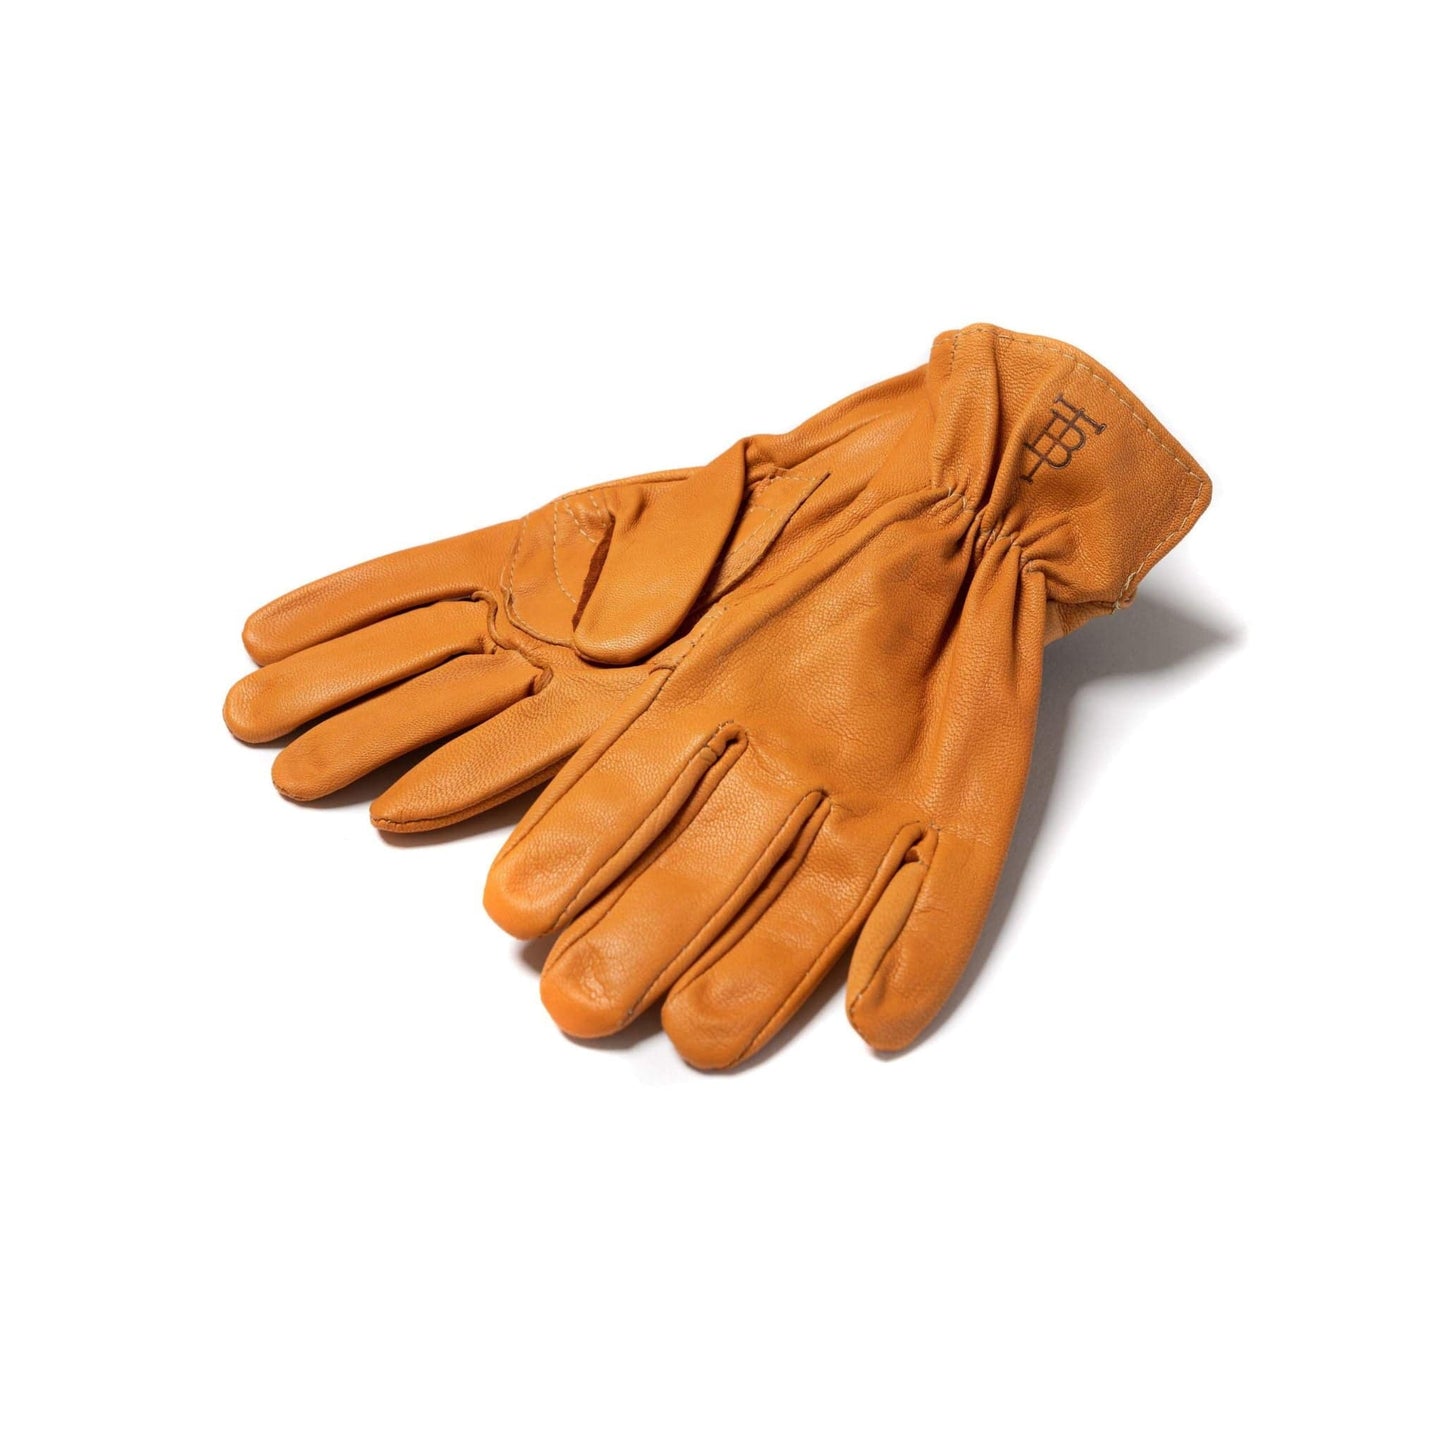 Lightweight Leather Shooting Gloves | Saddle | Size 8.5